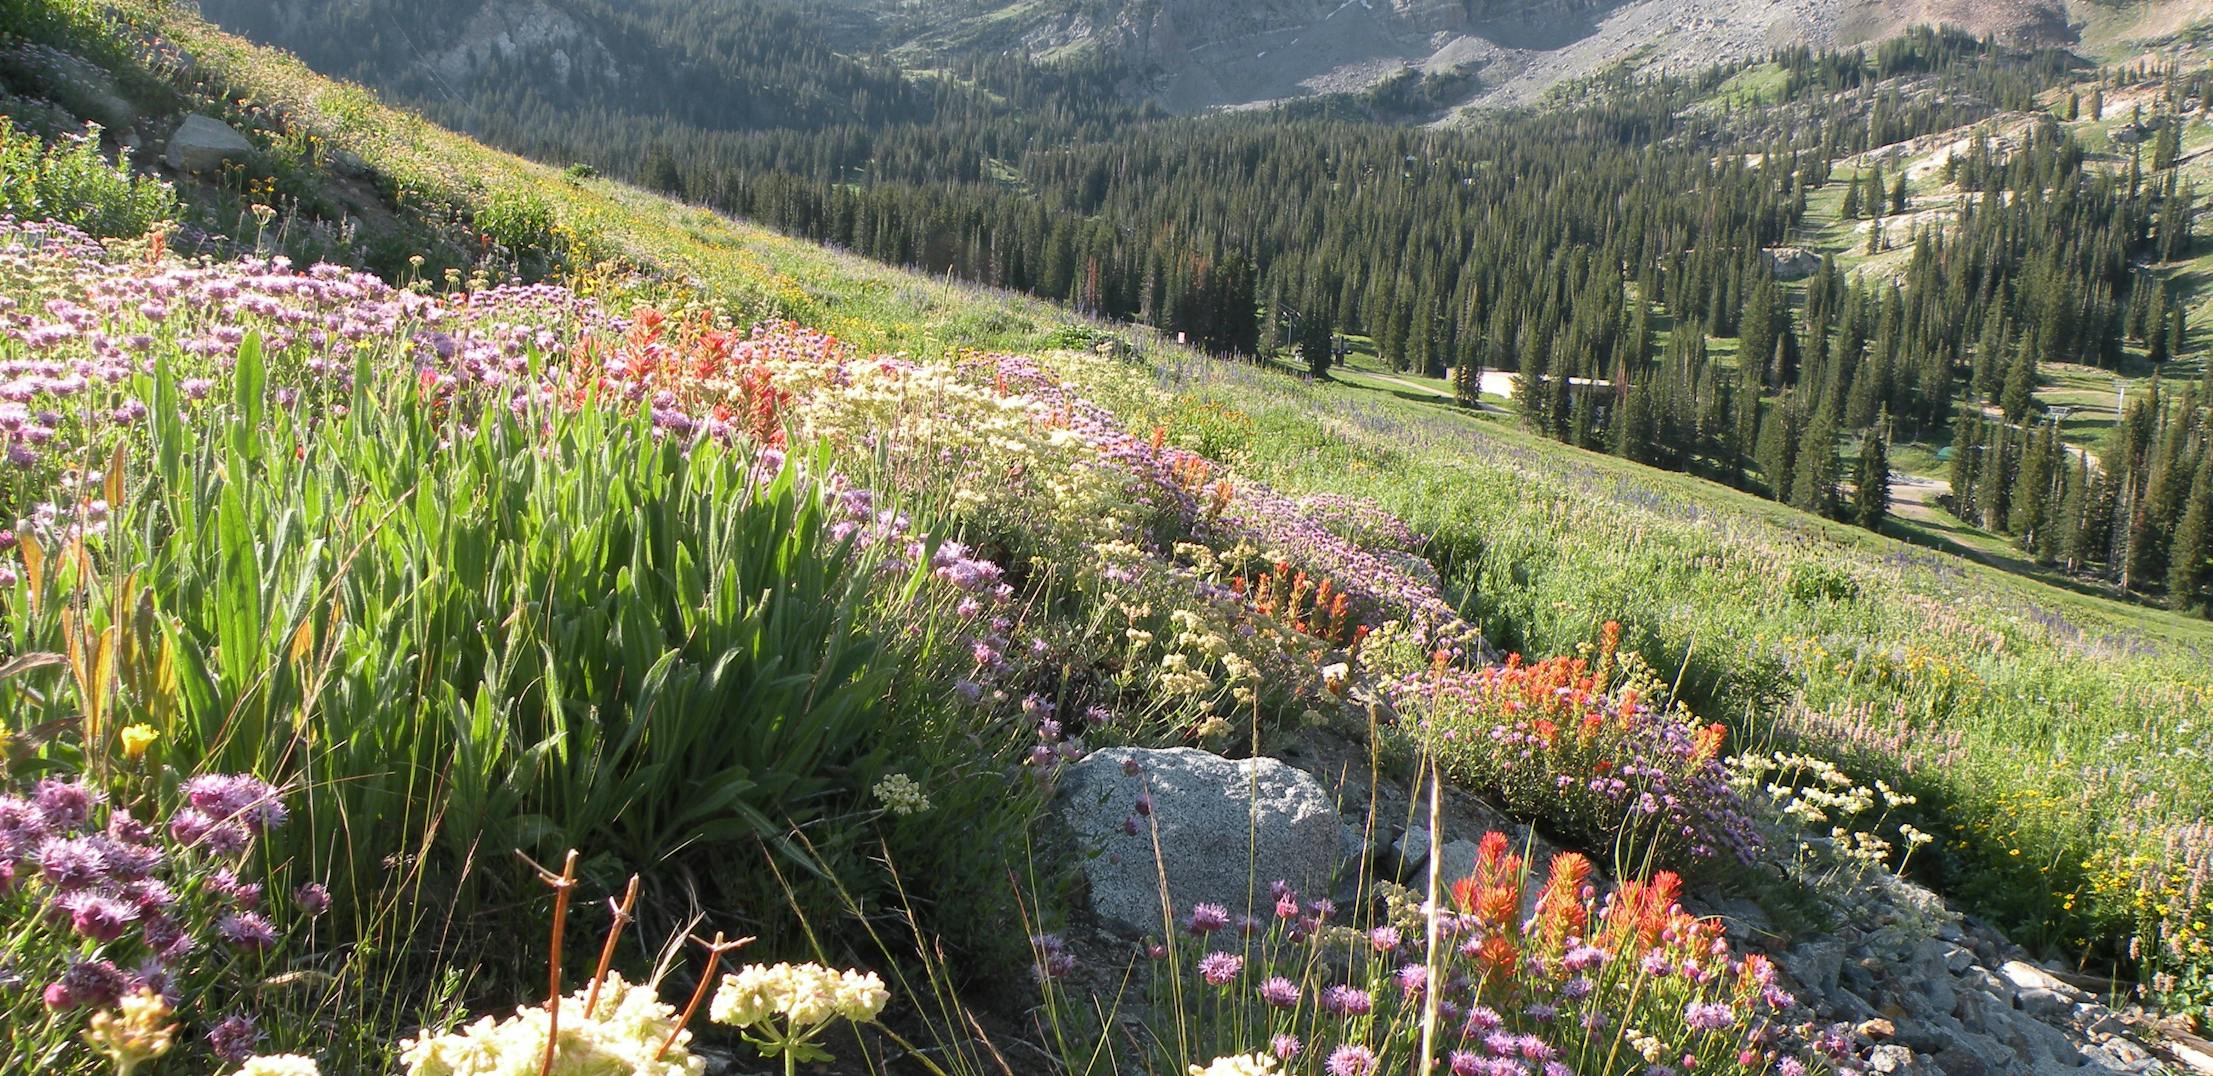 White, pink, and red wildflowers blooming on a grass hillside in Uinta-Wasatch-Cache National Forest.